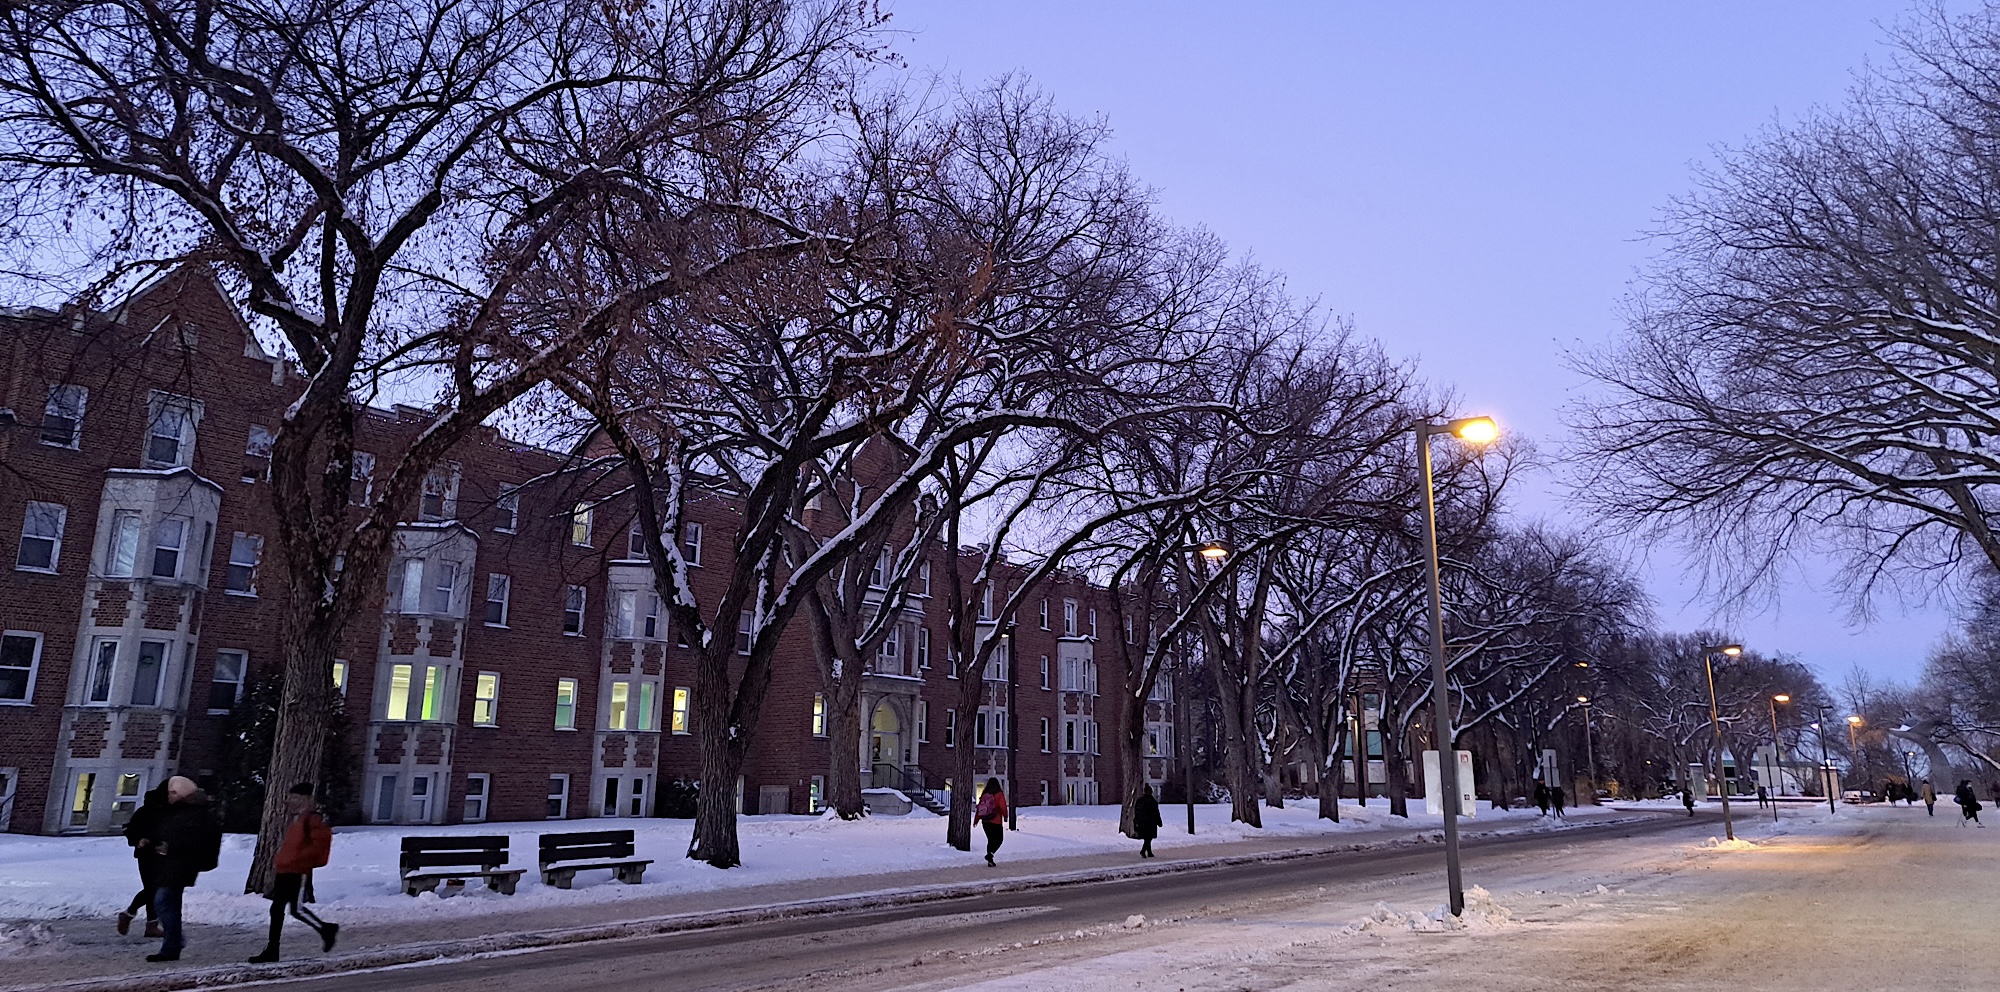 Trees line a snowy street in front of brick buildings